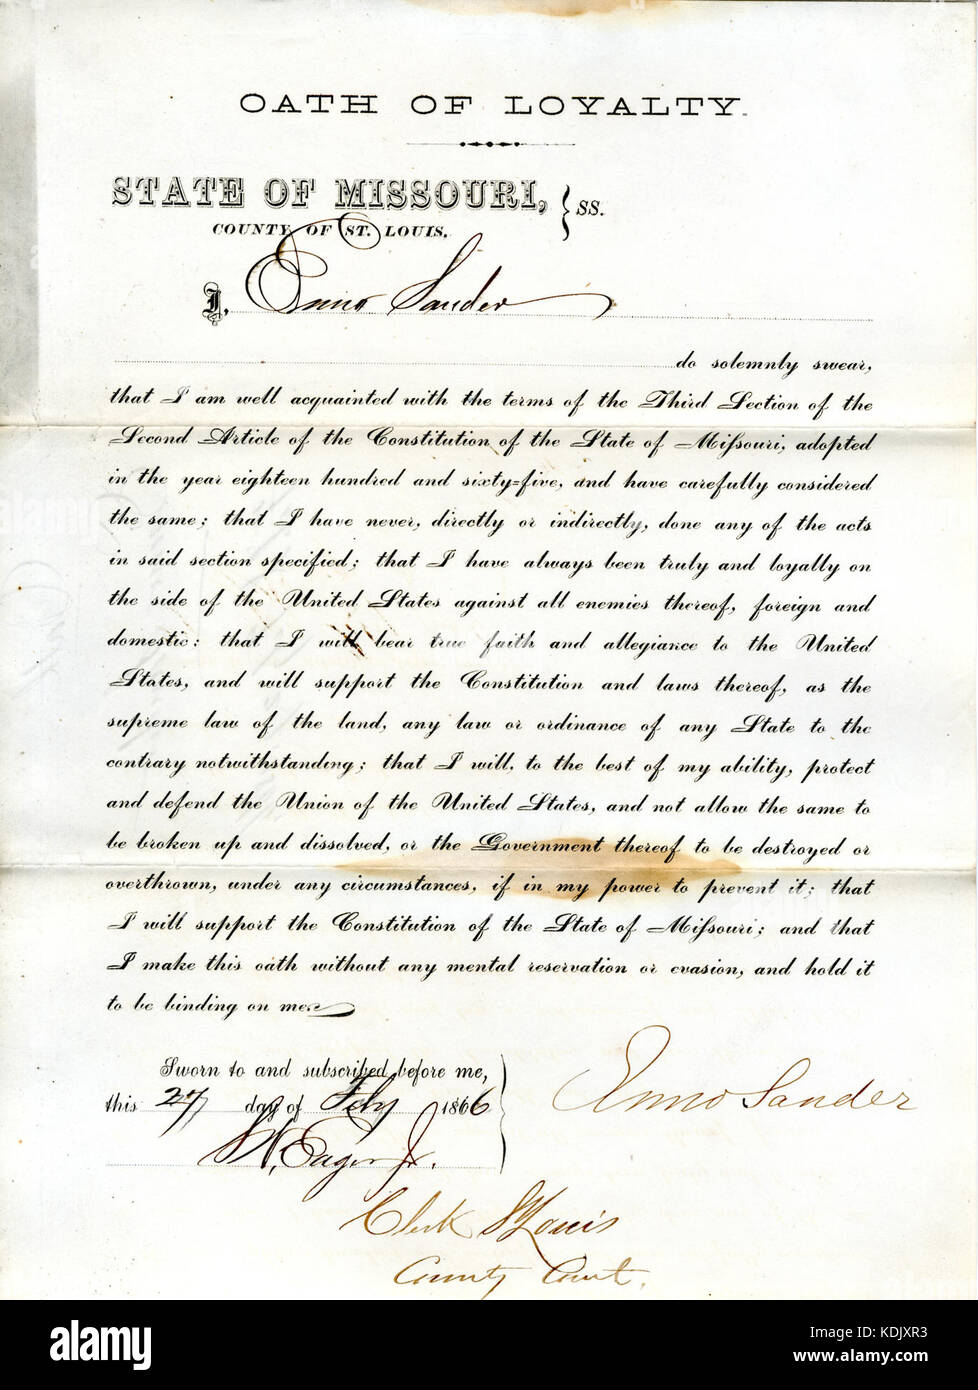 Loyalty oath of Enno Sander of Missouri, County of St. Louis Stock Photo